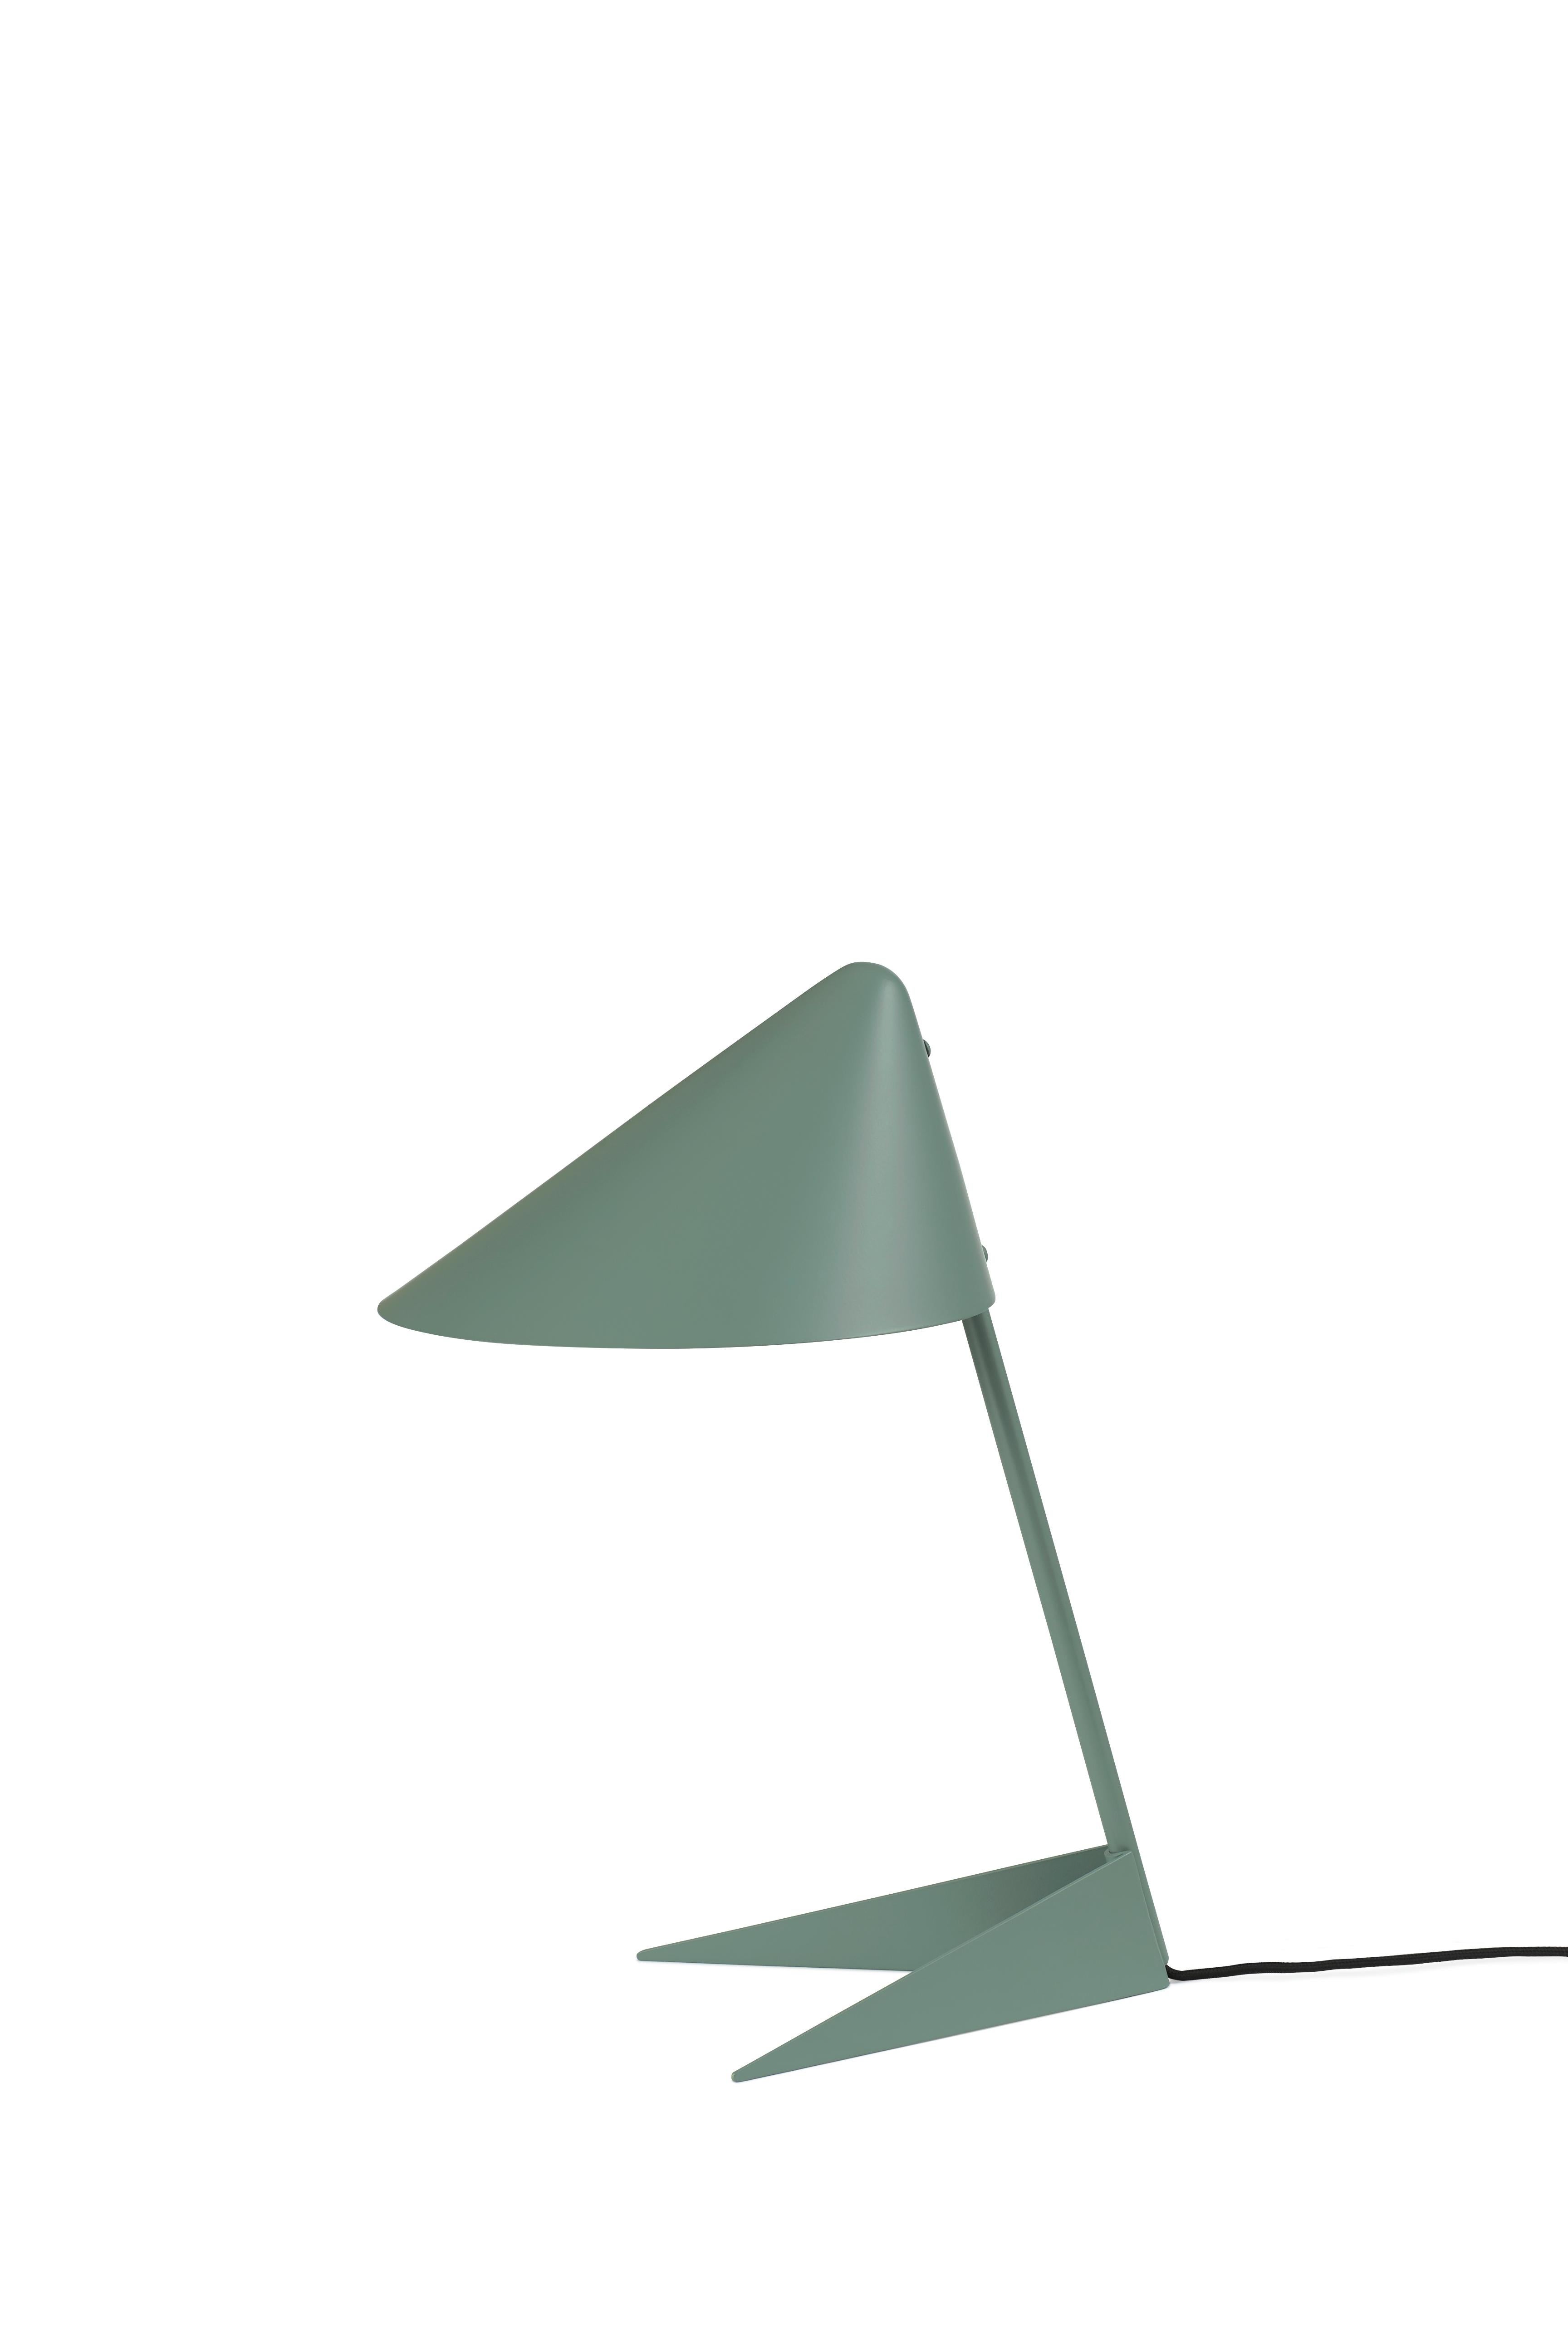 For Sale: Green (Dusty Green) Ambience Table Lamp, by Svend Aage Holm Sorensen from Warm Nordic